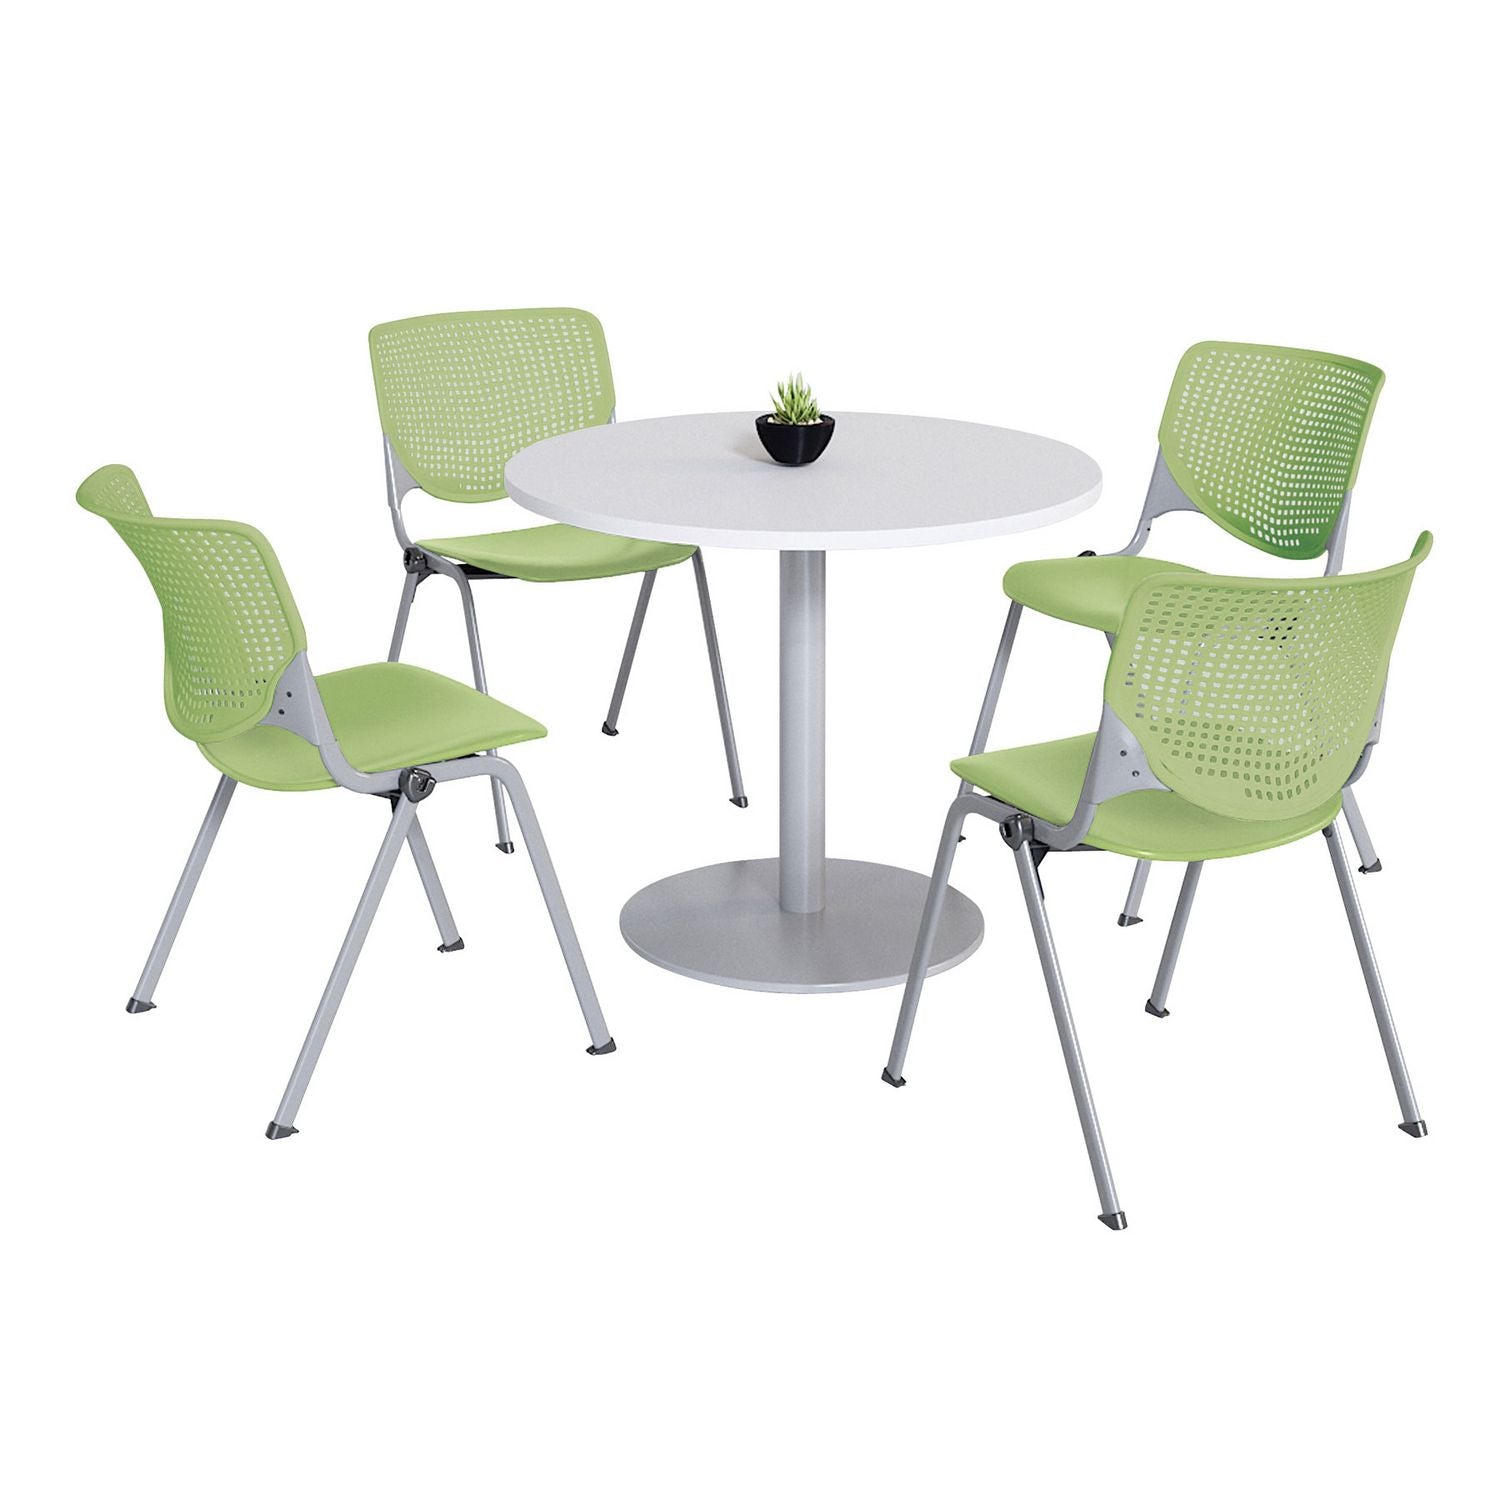 pedestal-table-with-four-lime-green-kool-series-chairs-round-36-dia-x-29h-designer-white-ships-in-4-6-business-days_kfi811774036726 - 1